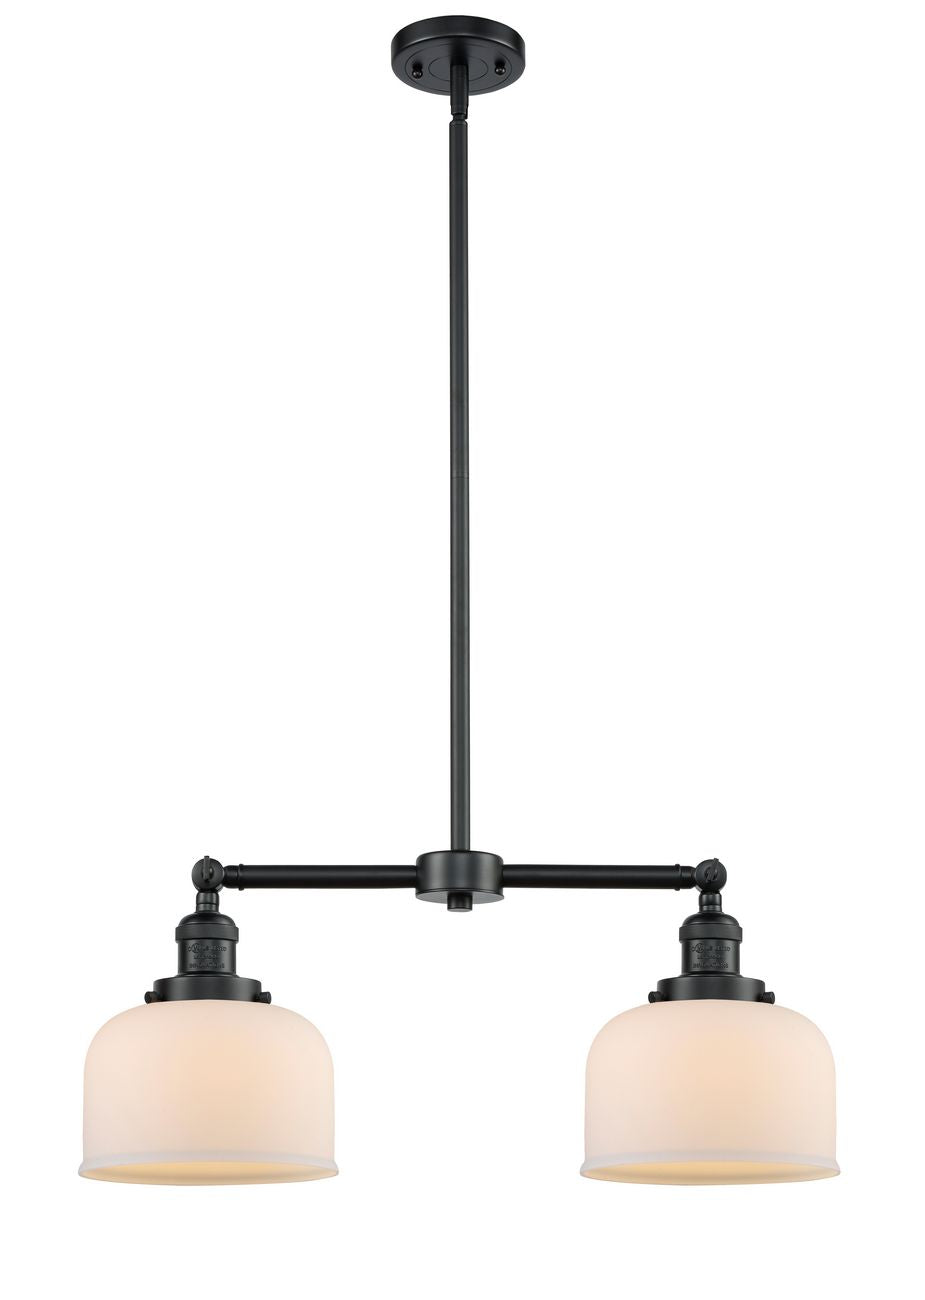 209-OB-G71 2-Light 21" Oil Rubbed Bronze Island Light - Matte White Cased Large Bell Glass - LED Bulb - Dimmensions: 21 x 5 x 10<br>Minimum Height : 20.875<br>Maximum Height : 44.875 - Sloped Ceiling Compatible: Yes